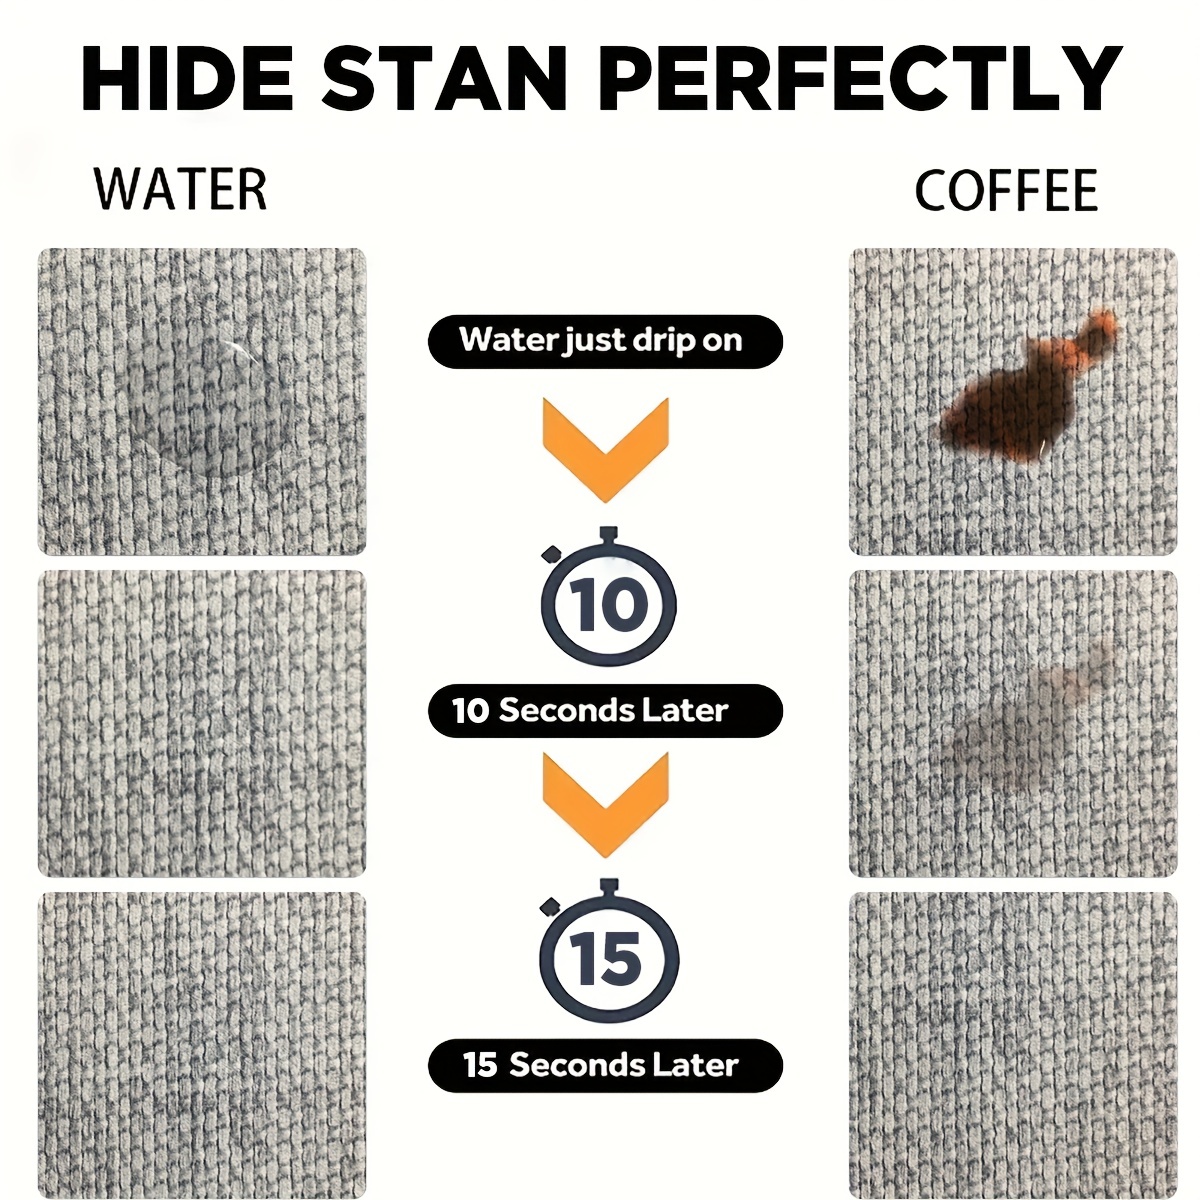 1pc Coffee Bar Mat, 15.75x23.62inch Under Coffee Maker Mat, Super Absorbent  Dish Drying Mat, Hidden Stain Rubber Back Non Slip Drying Pad For Kitchen